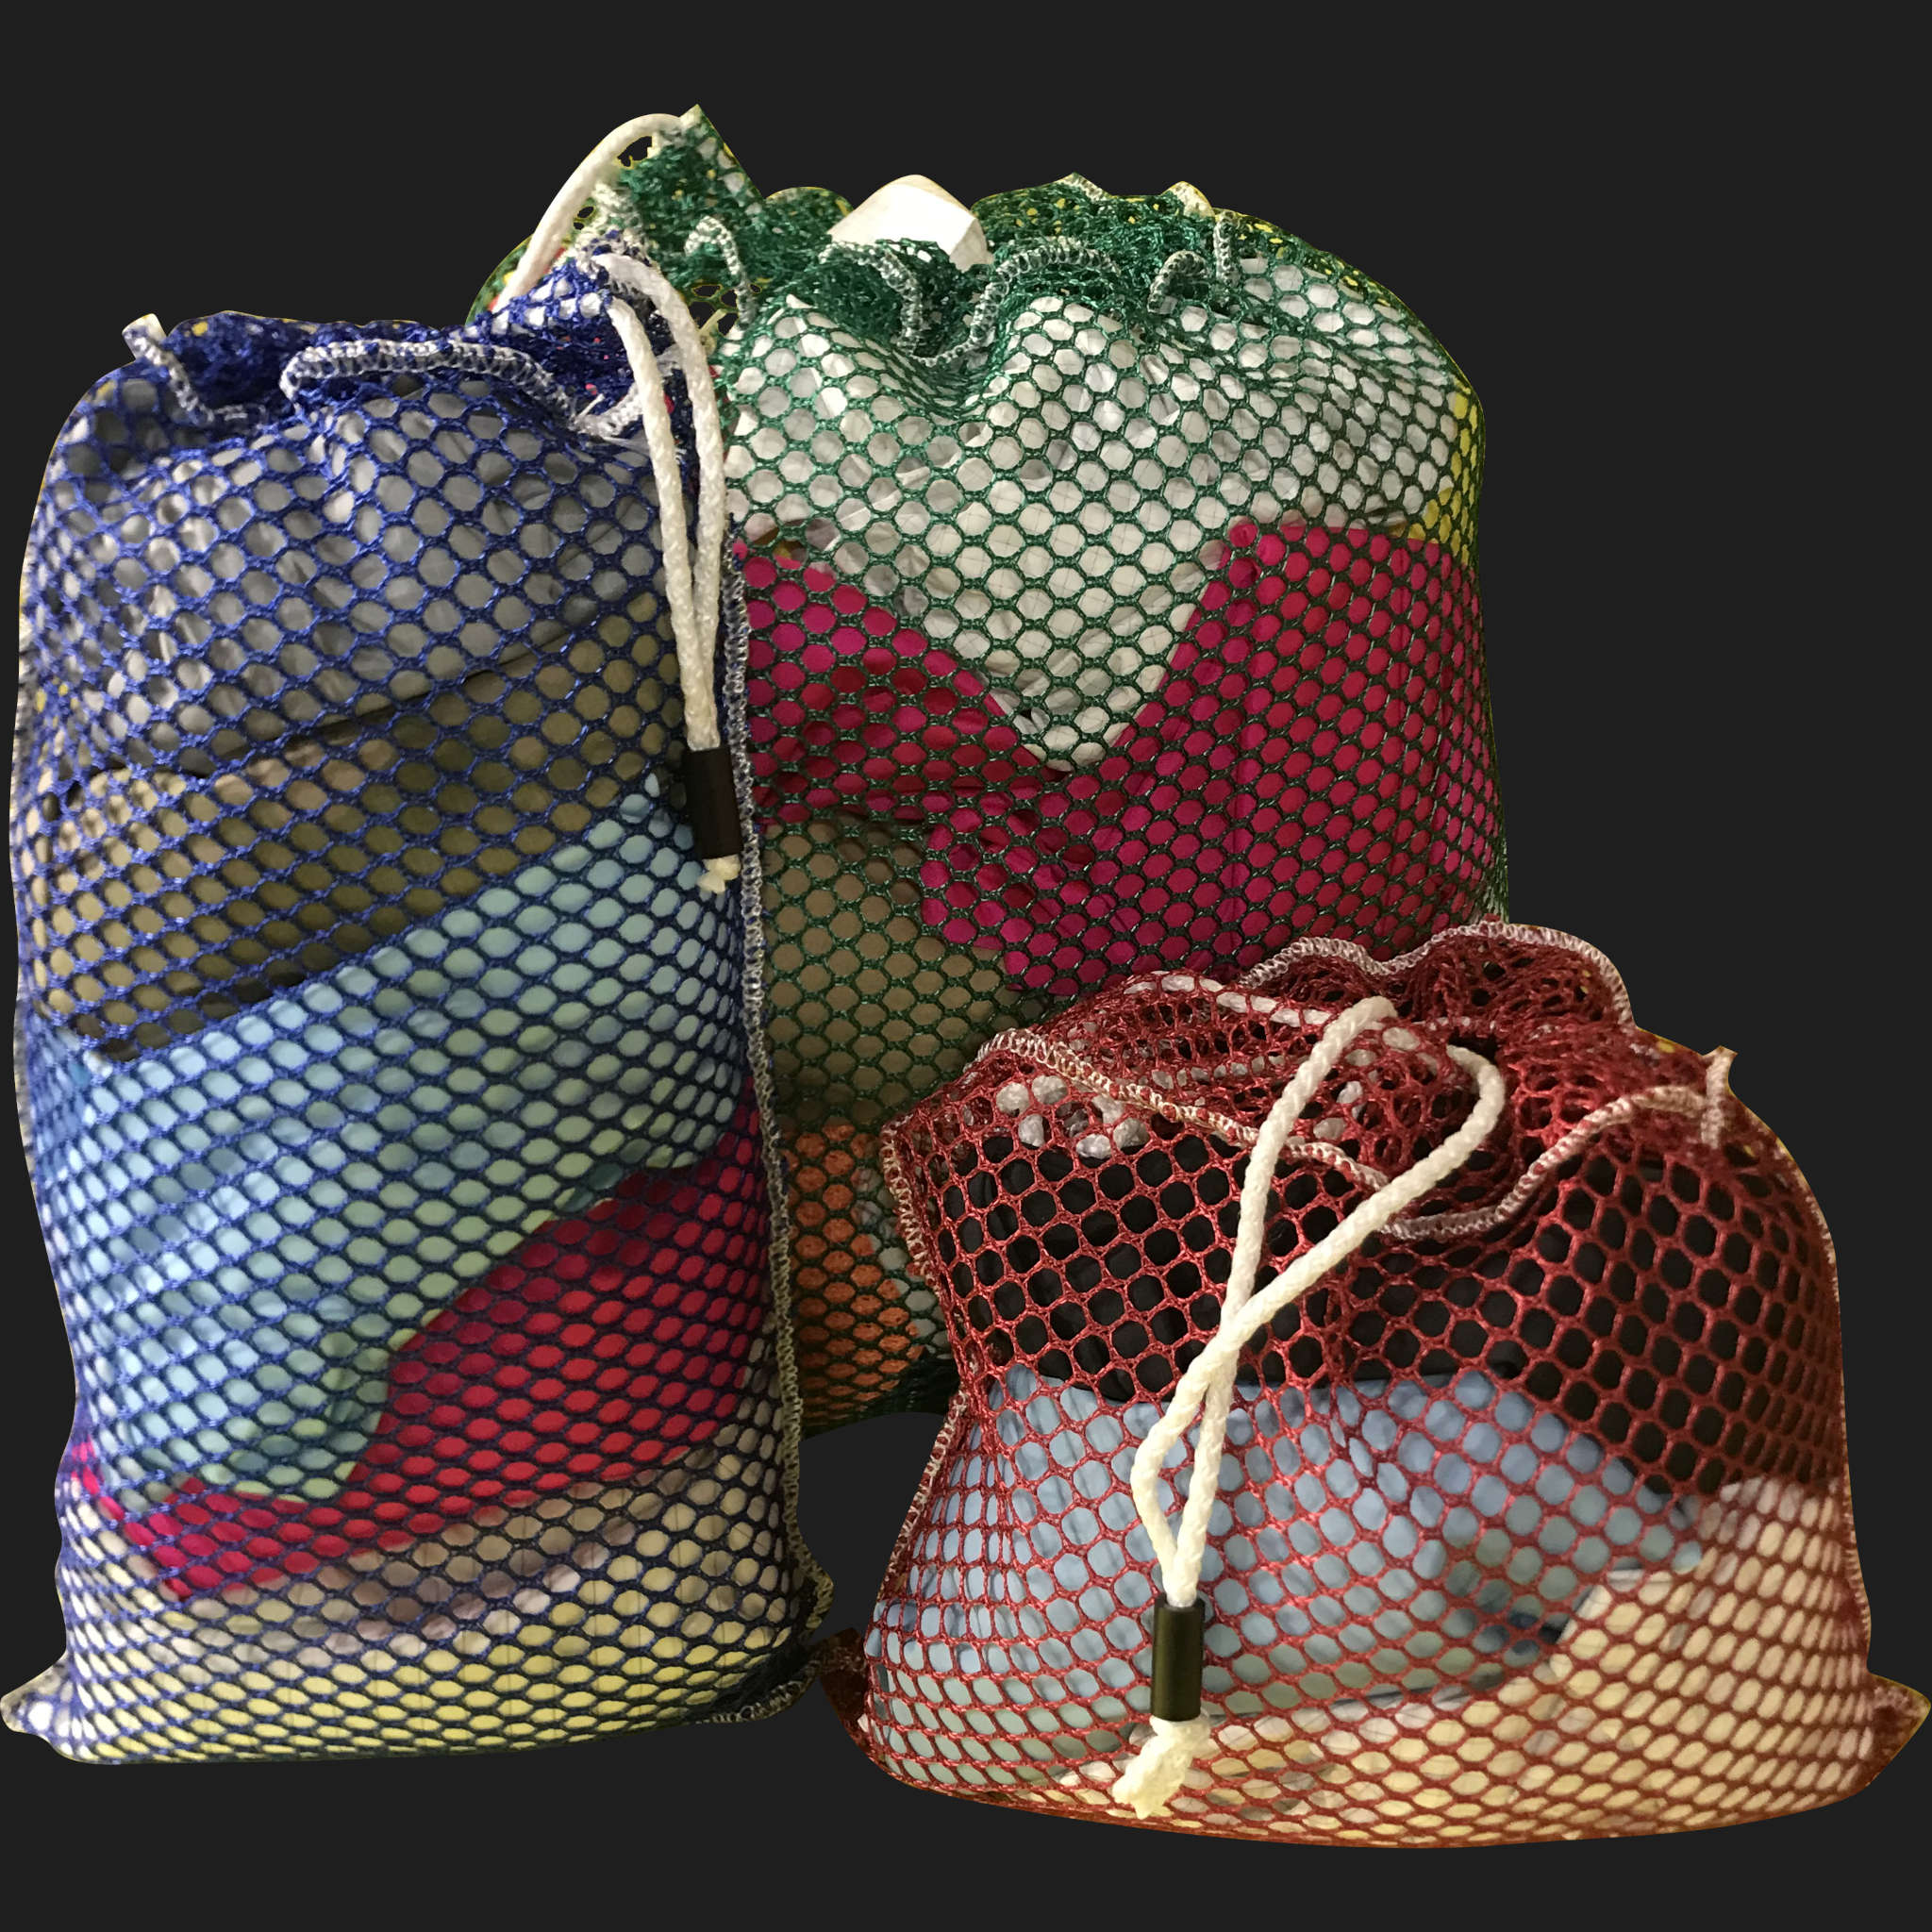 54" x 58" Customized Mesh-Net-Laundry Bags Heavy Duty with Cord and barrellock closure